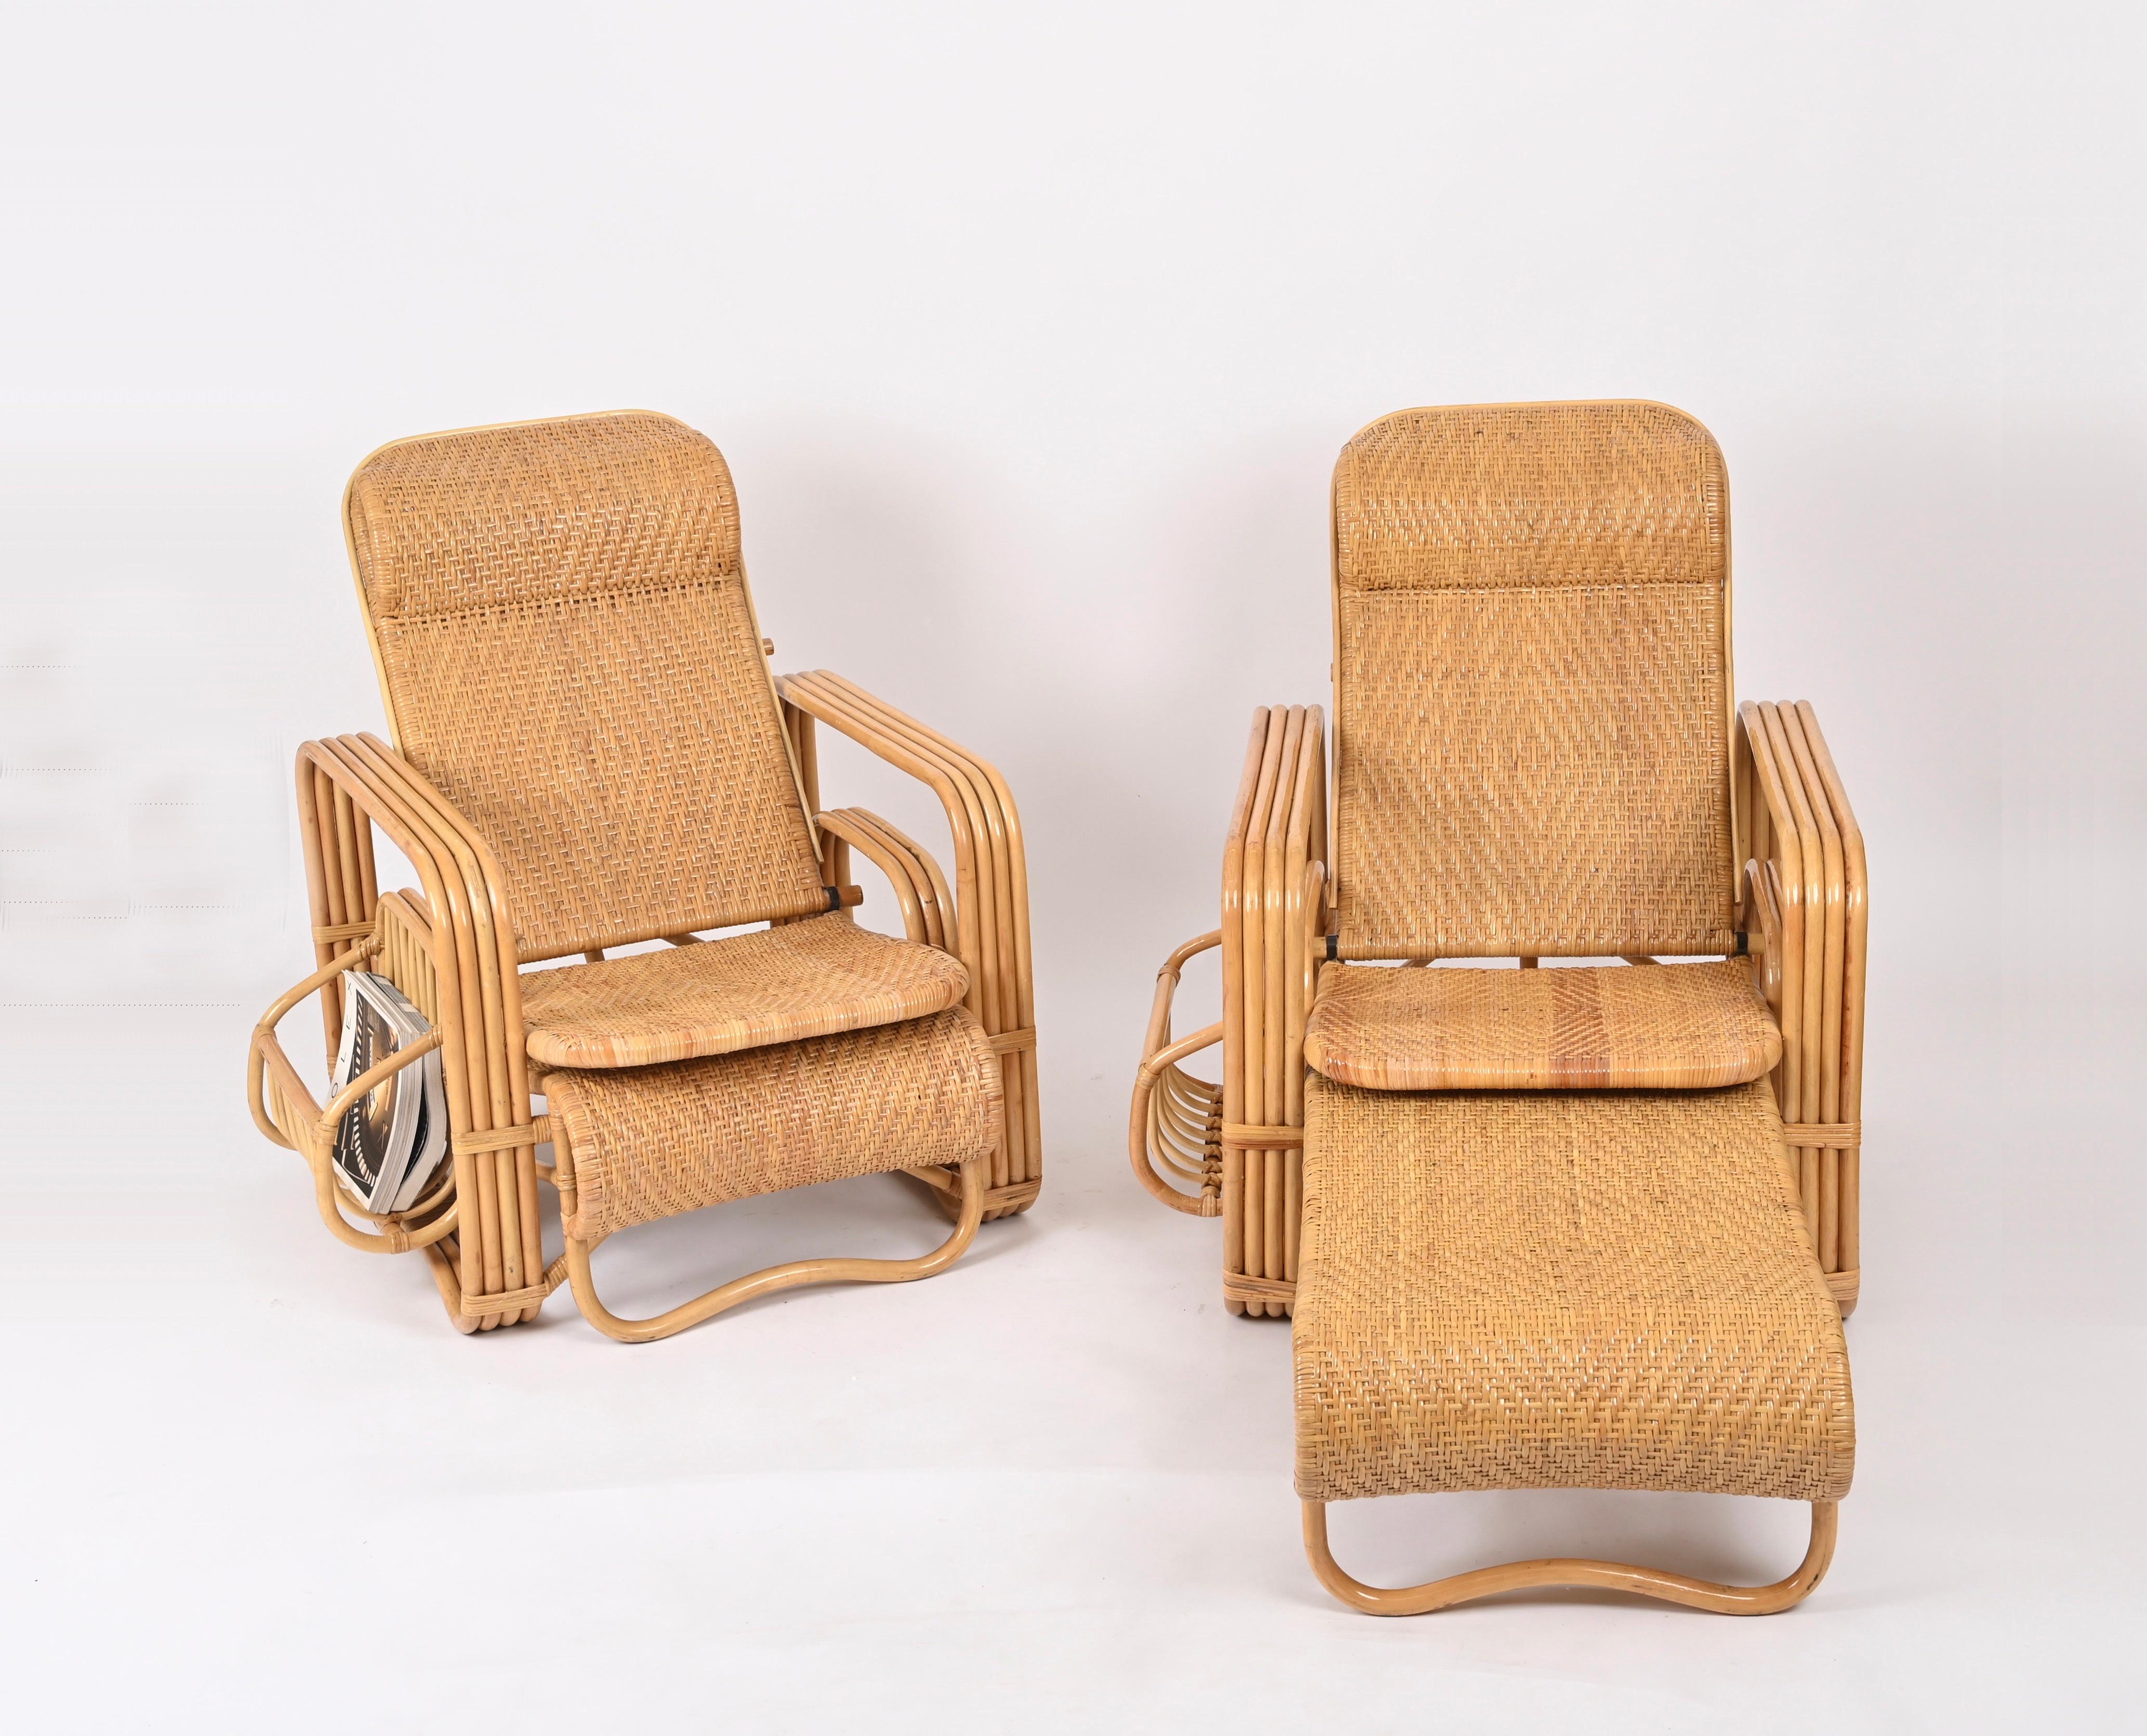 Pair of Adjustable Chaise Longue / Lounge Chairs, Wicker and Rattan, Italy '70s  For Sale 6